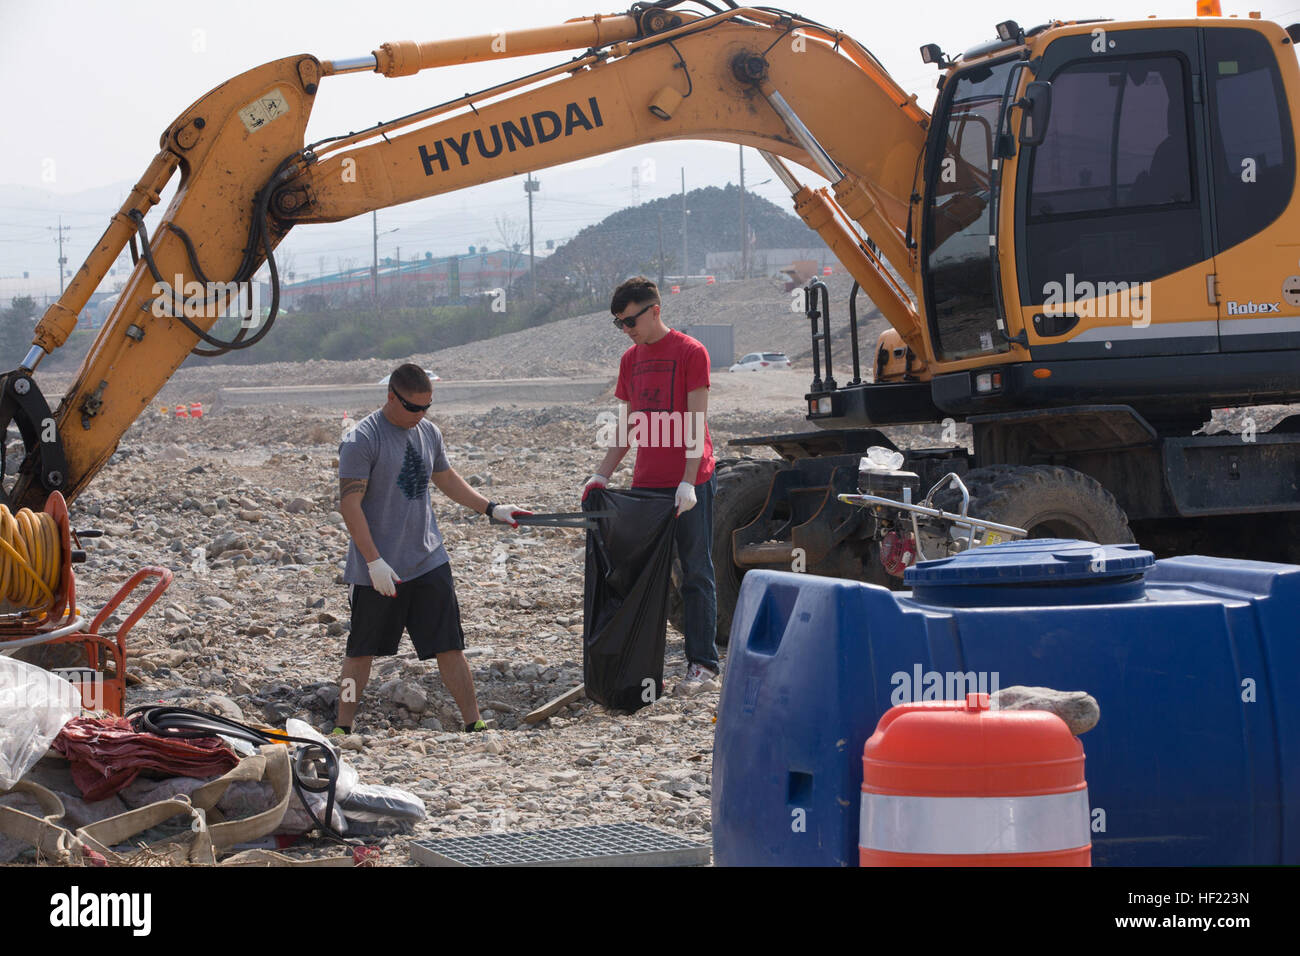 U.S. Marine Corps Lance Cpls. Gregory Kern and Christopher Major, both embarkation specialists with the III Marine Expeditionary Force, pick up trash during a community service project March 28, 2014, at Ocheon Stream in Pohang, South Korea, as part of exercise Ssang Yong 2014. Ssang Yong is a combined U.S.-South Korean combat readiness and joint/combined interoperability exercise designed to advance South Korean command and control capabilities through amphibious operations. (U.S. Marine Corps photo by Cpl. Sara A. Medina/Released) U.S. Marine Corps Lance Cpls 140328-M-RN526-075 Stock Photo